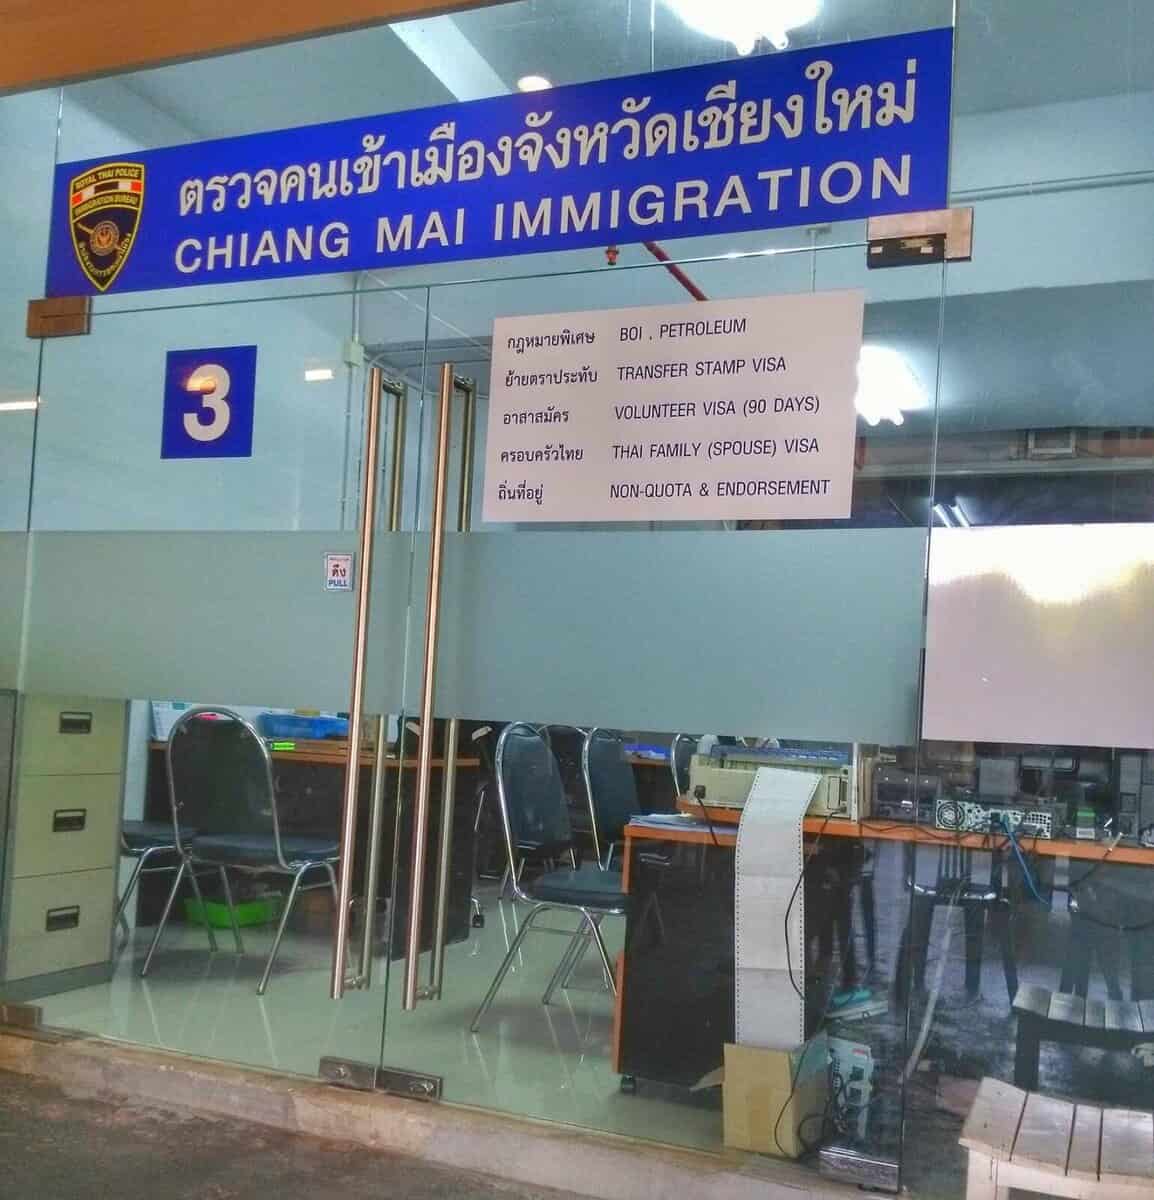 Chiang Mai Immigration,Promenada Mall - How to Apply For A ReEntry Permit